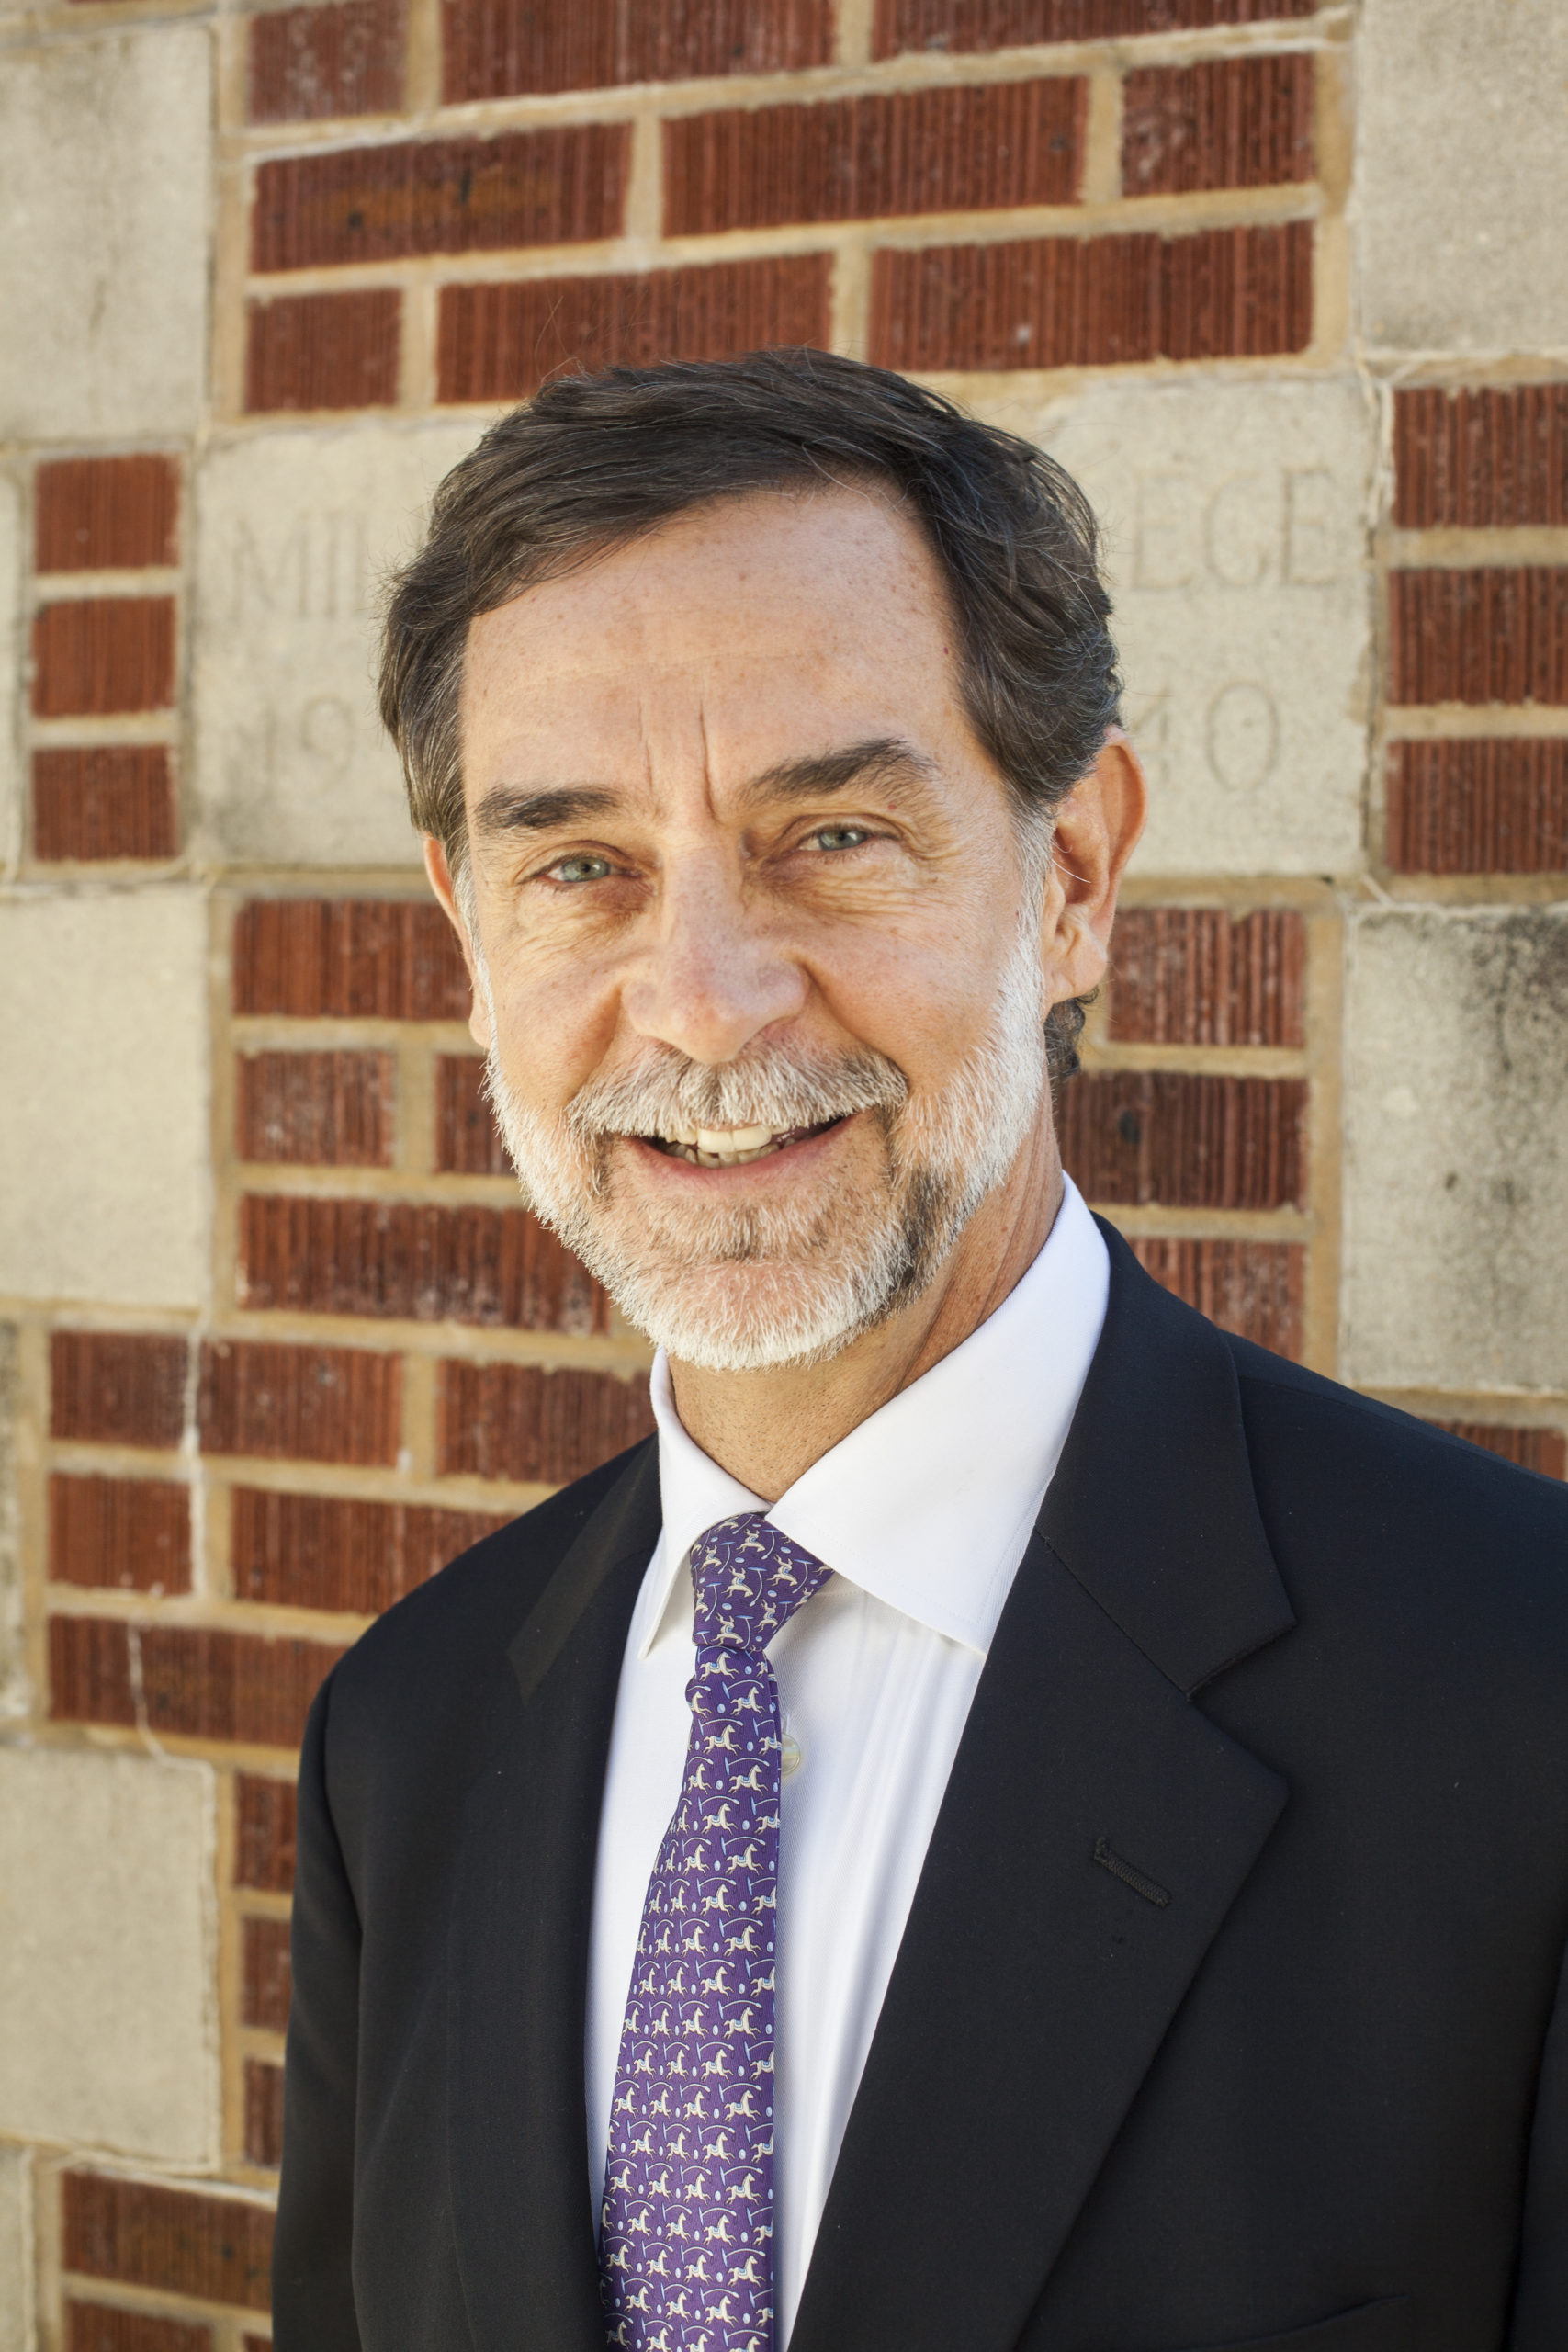 Millsaps President Pearigen Discusses Cannon’s Removal and the College’s Efforts to Increase Diversity On-Campus